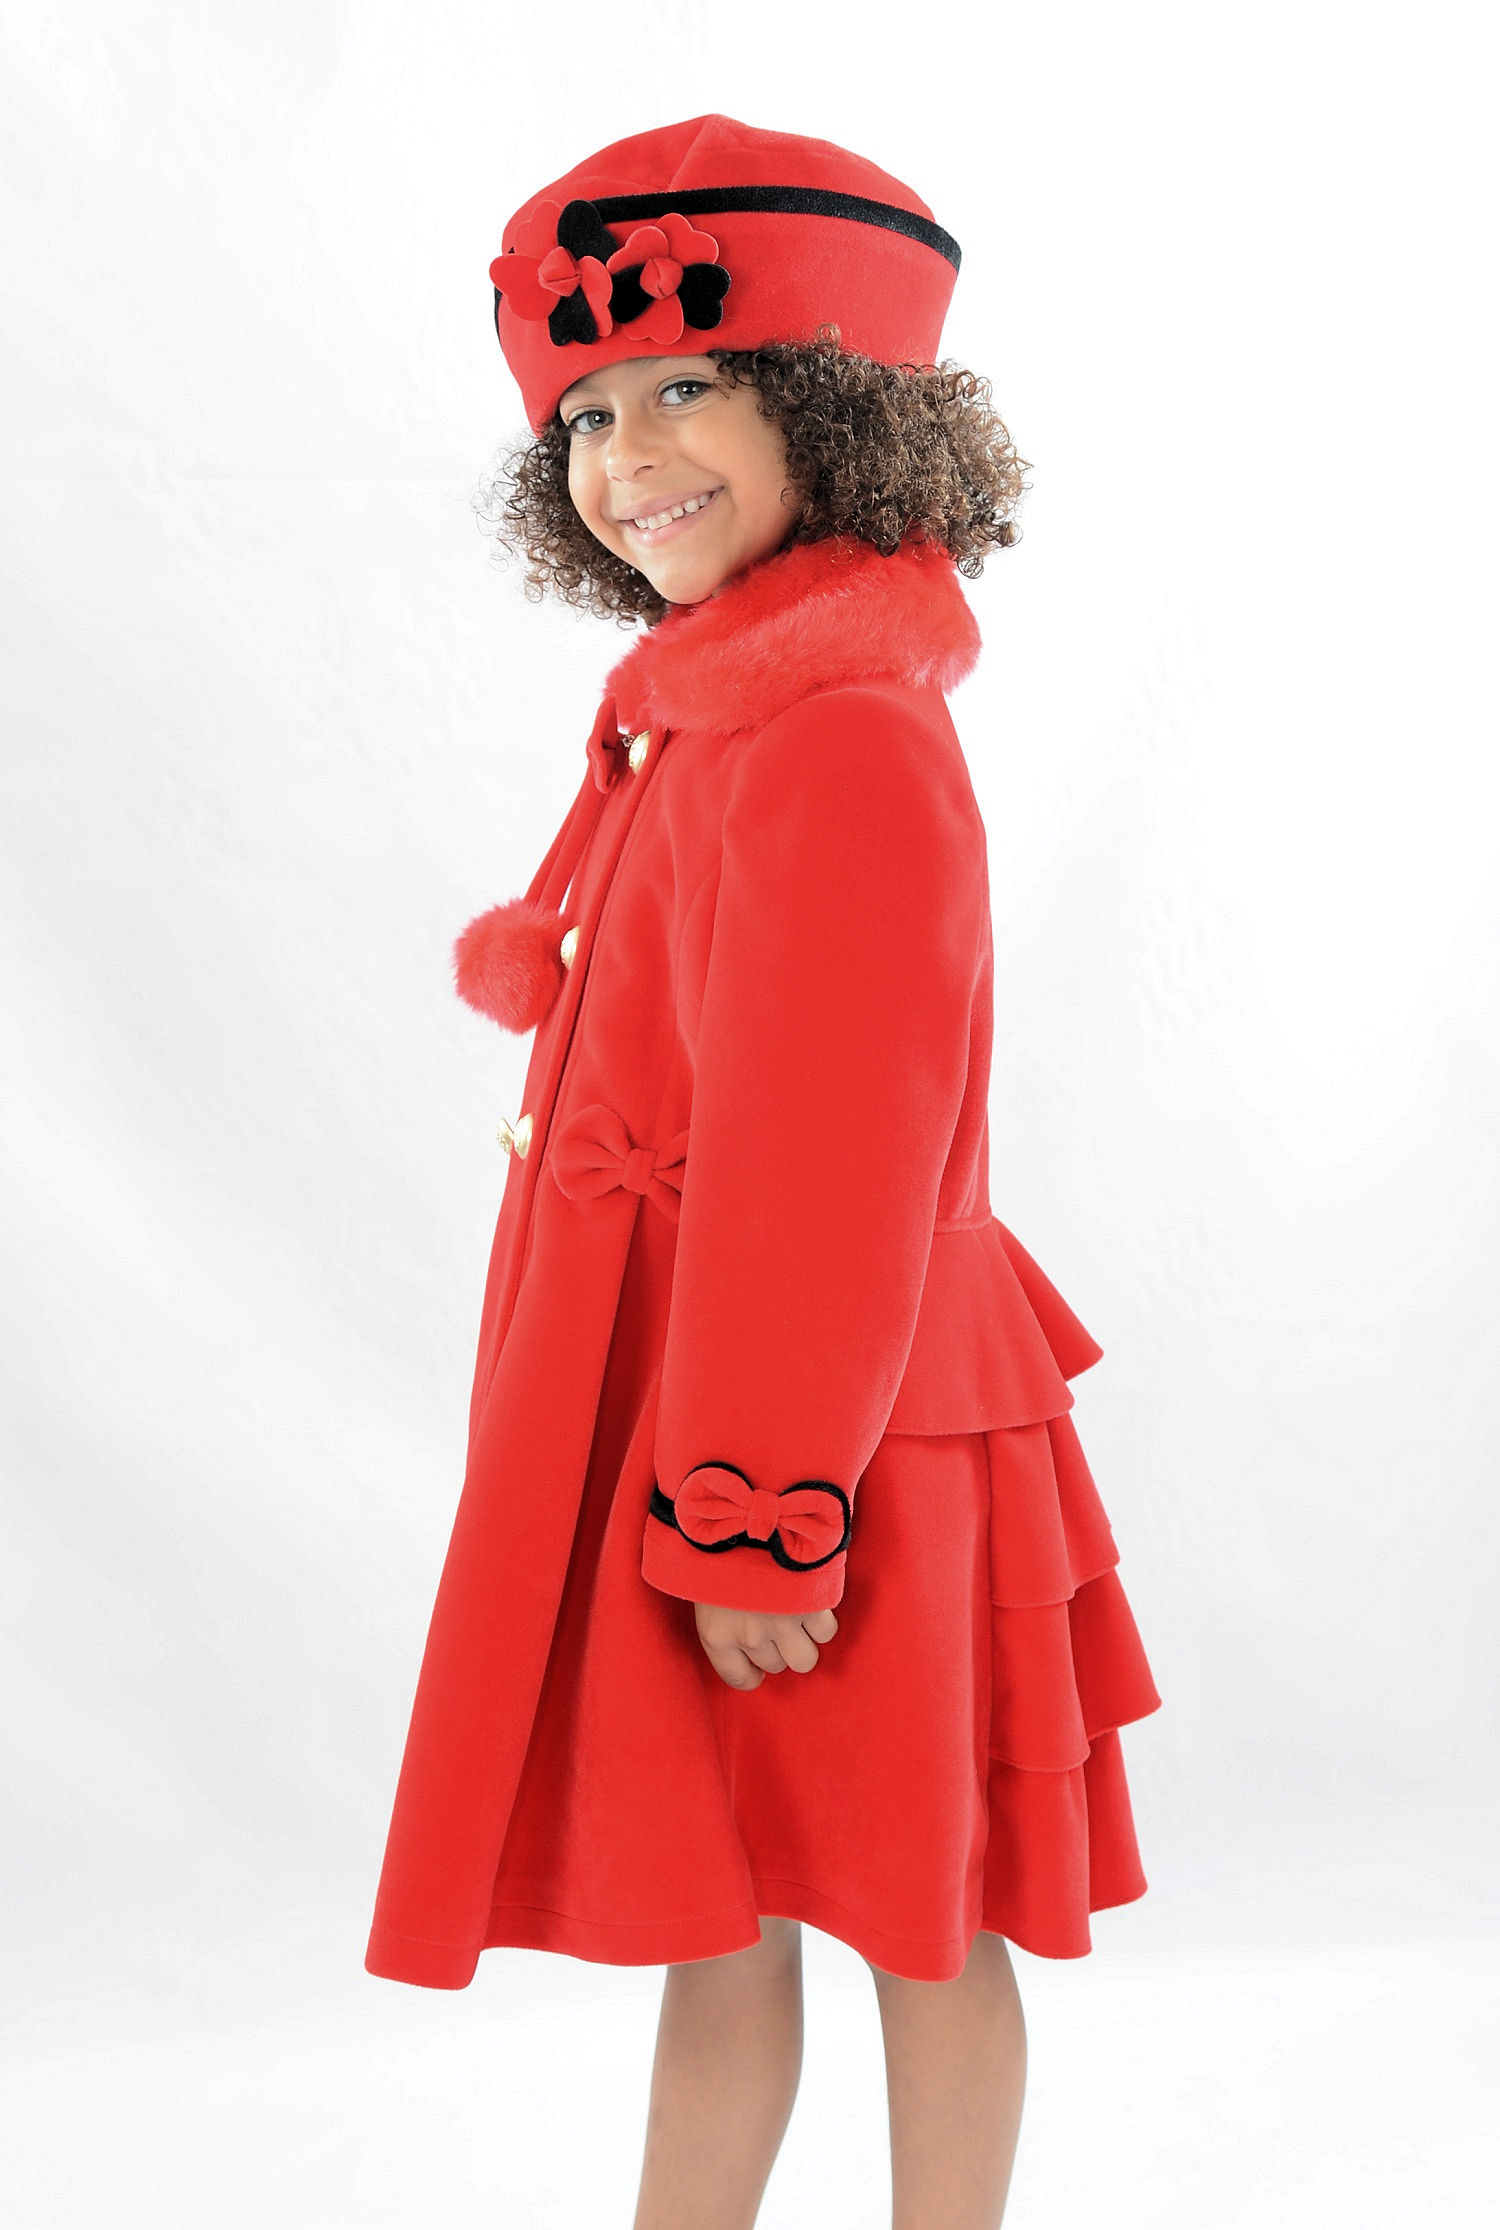 BNWT Red fully lined girls coat in red and cream with matching hat 